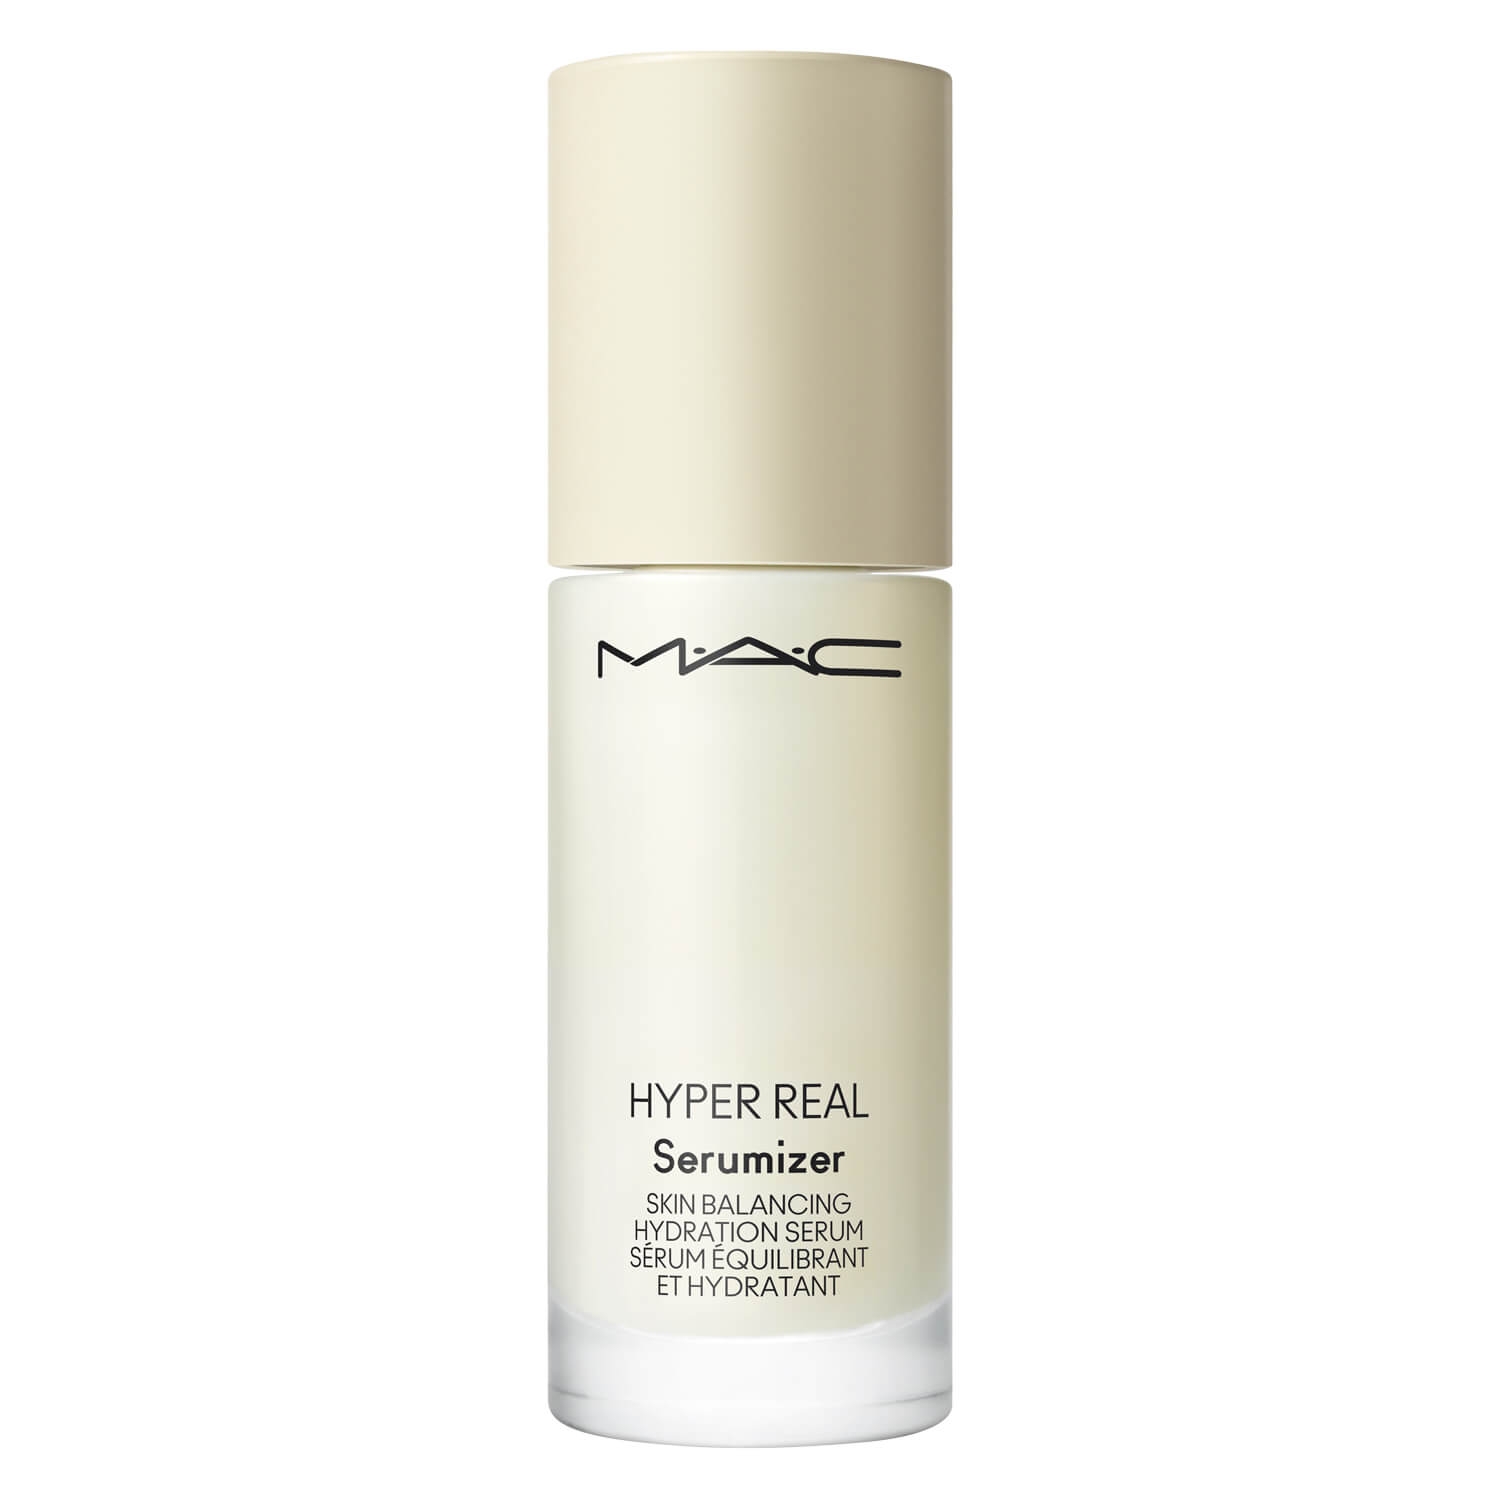 Product image from M·A·C Skin Care - Hyper Real Serumizer